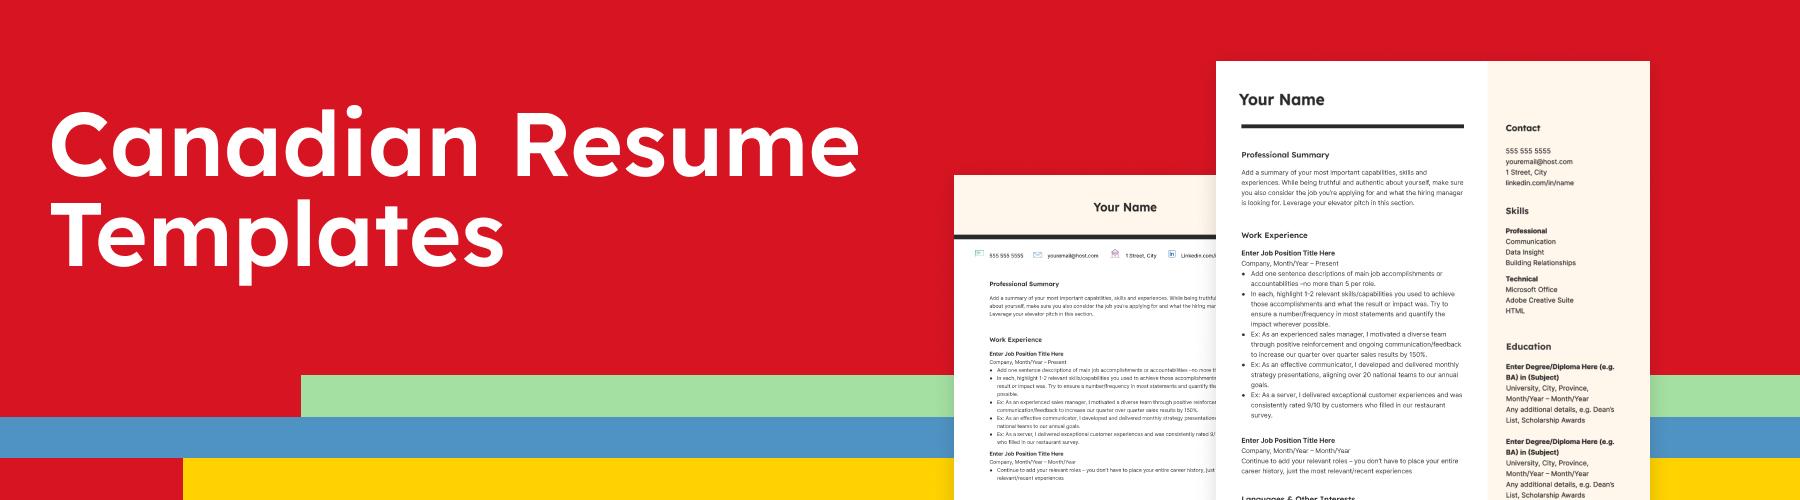 Download our free Canadian resume templates today!